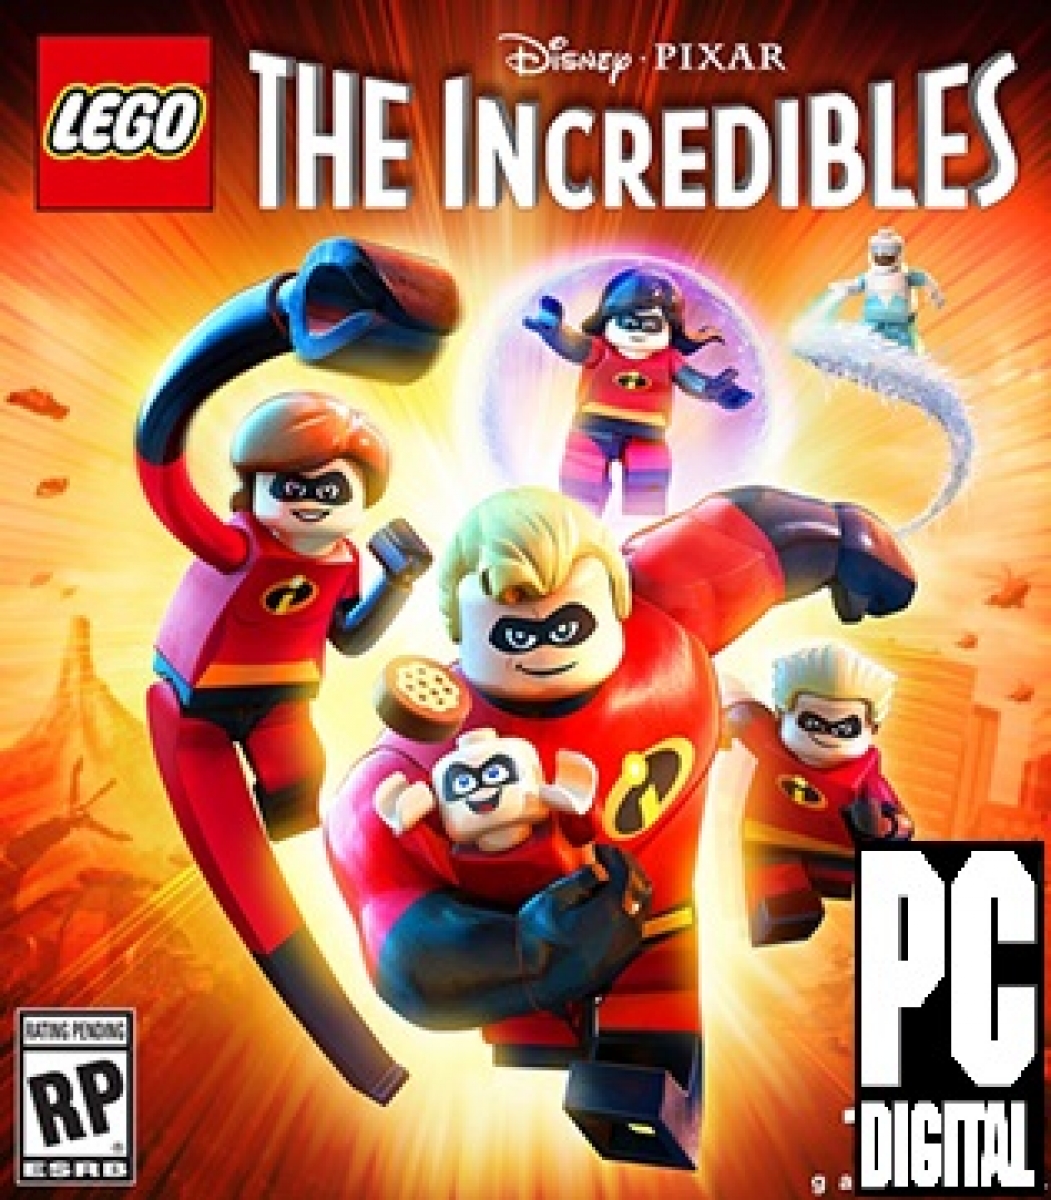 LEGO The Incredibles PC (Digital)